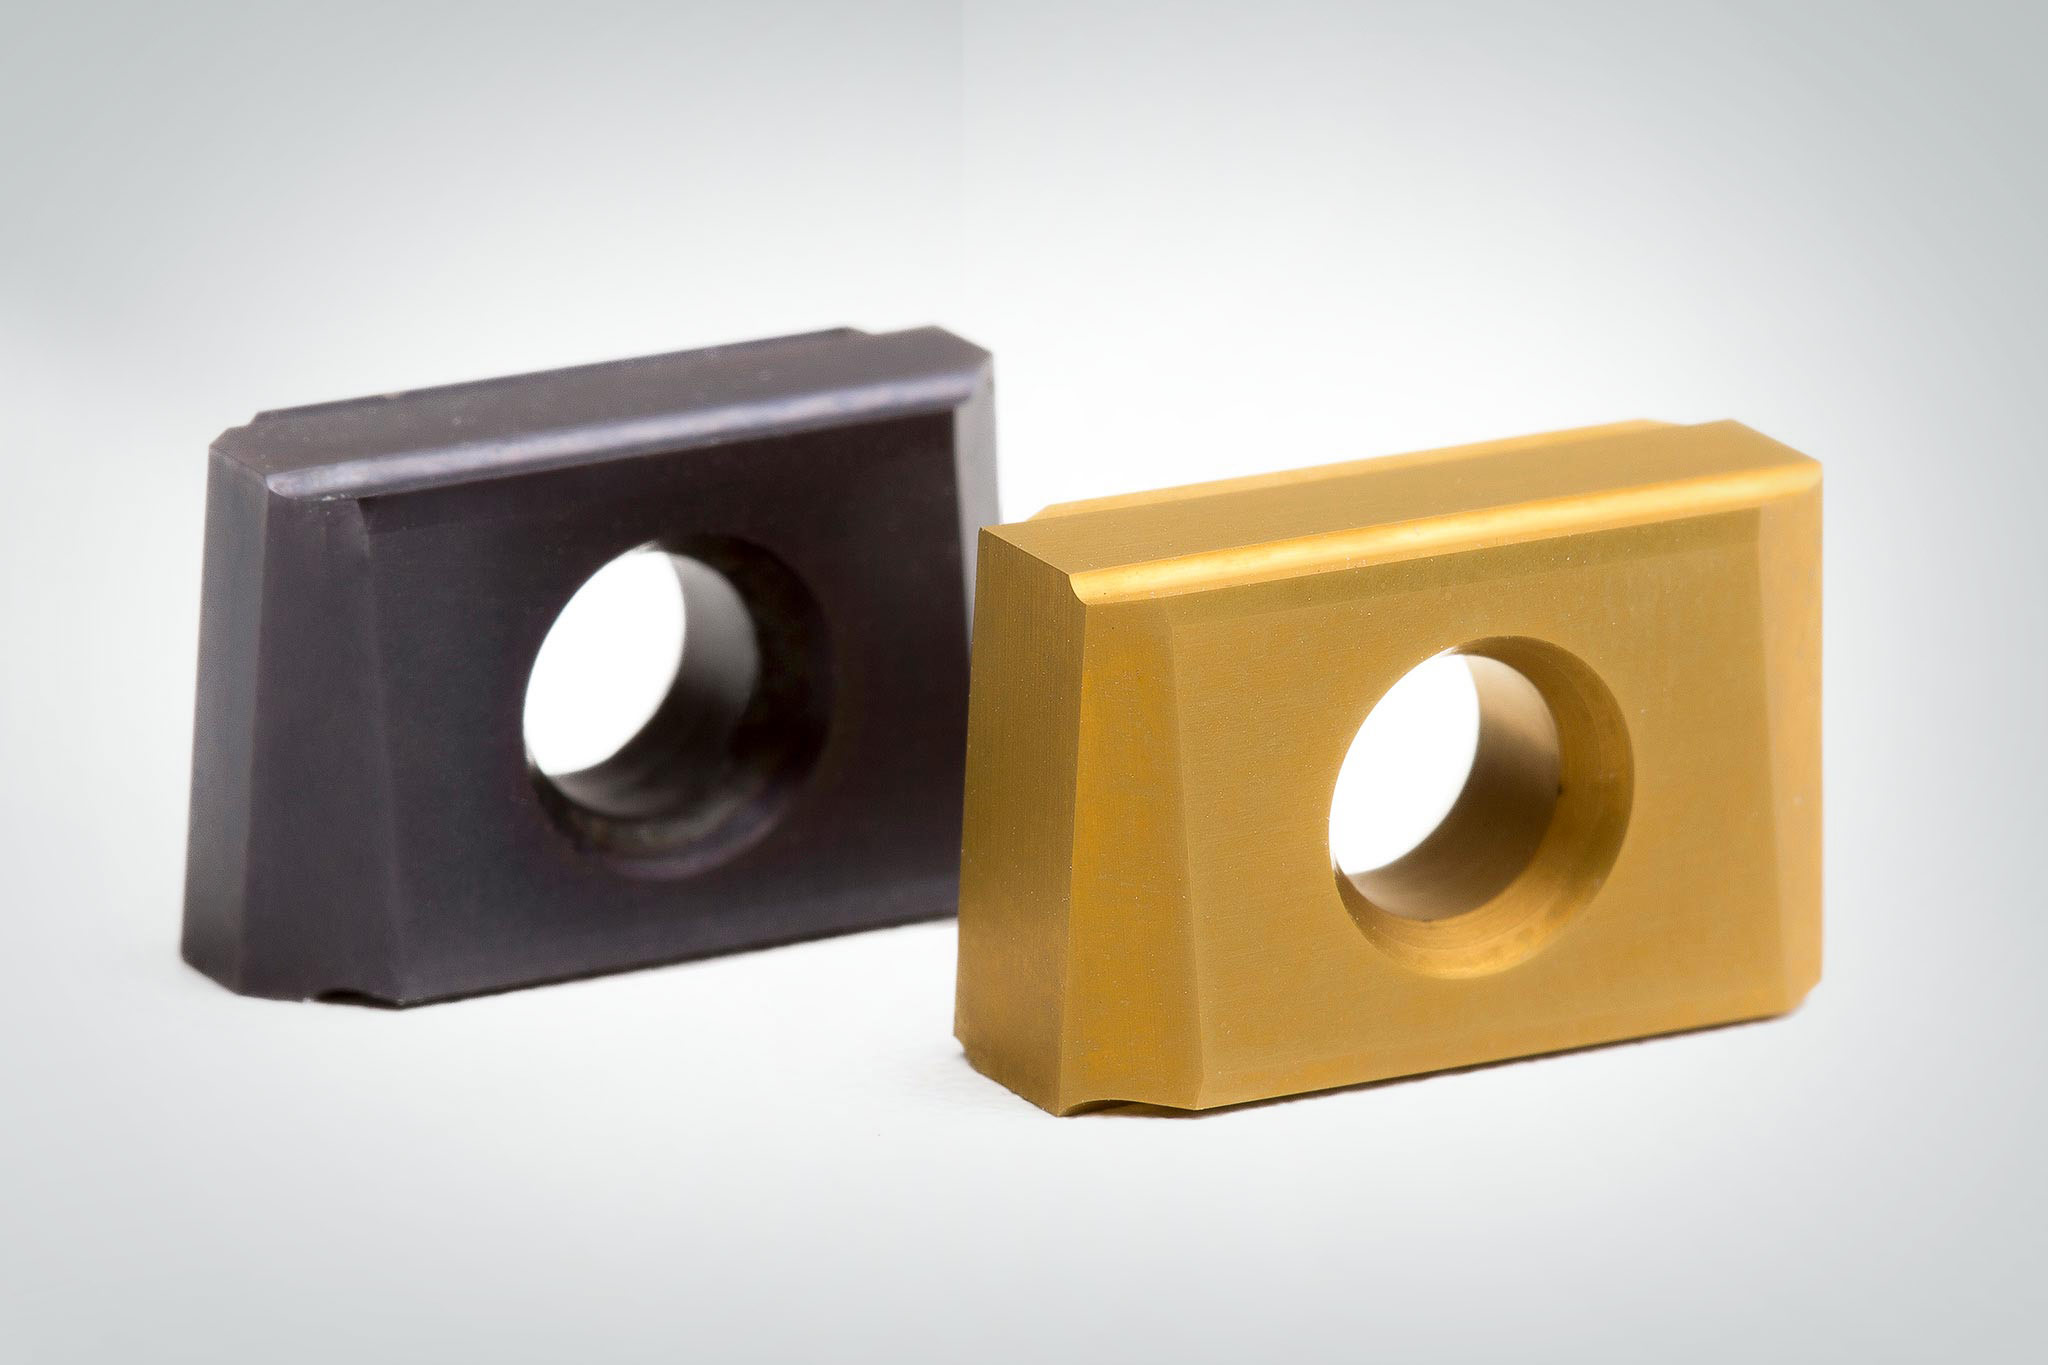 Two reversible cutting plates with different coatings are shown.